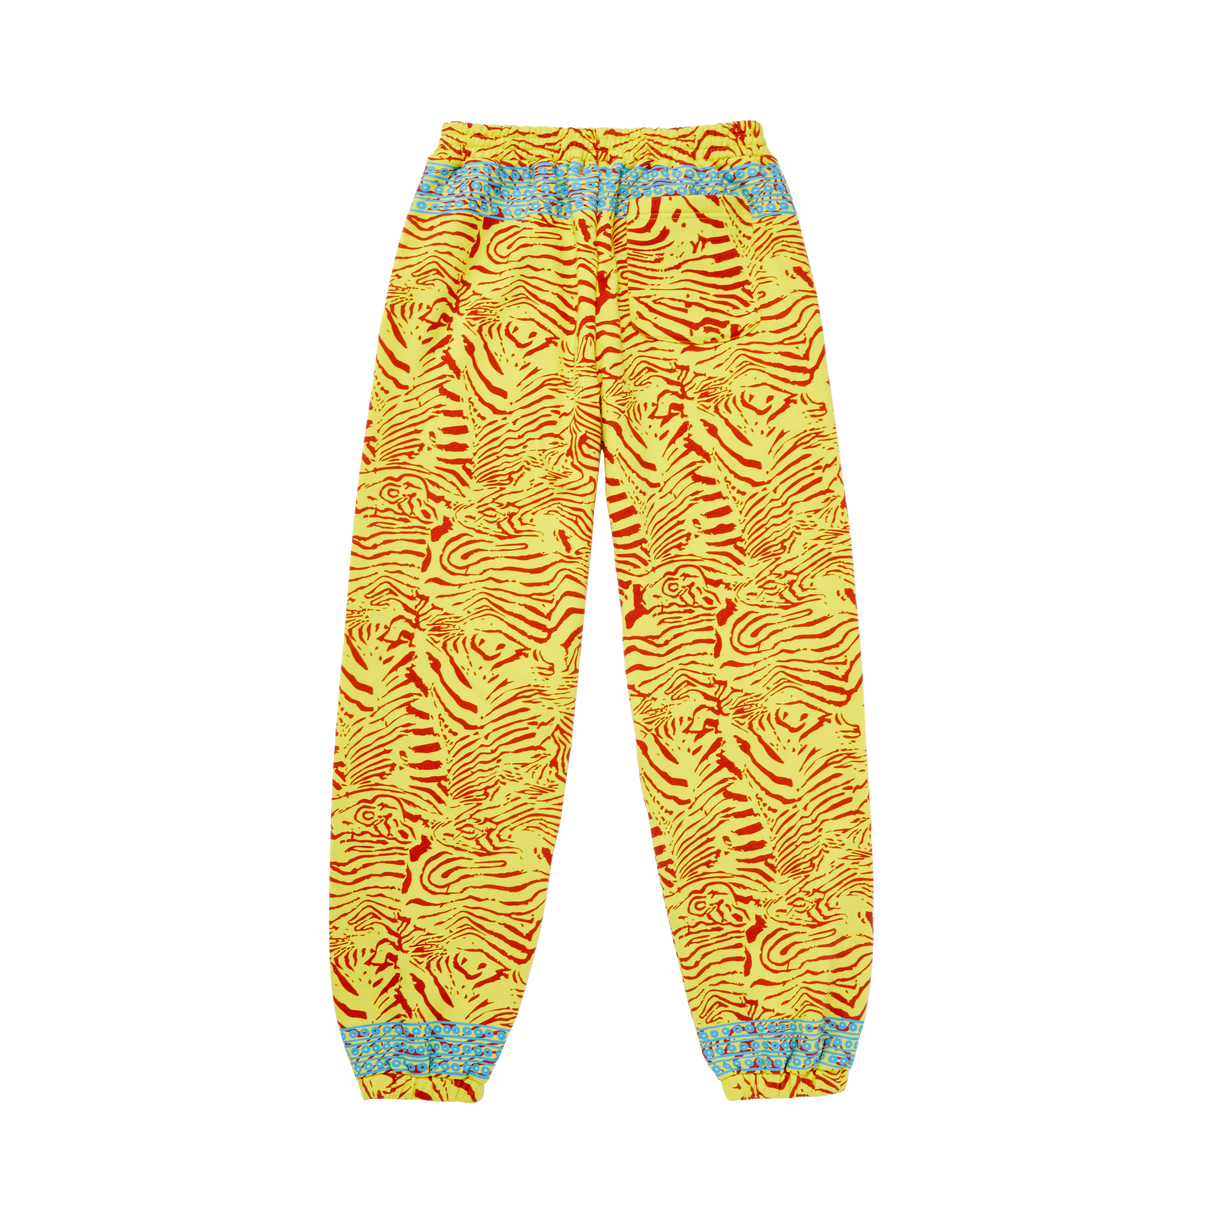 Michael Rios Special Artist Sweatpant – Red Hot Chili Peppers